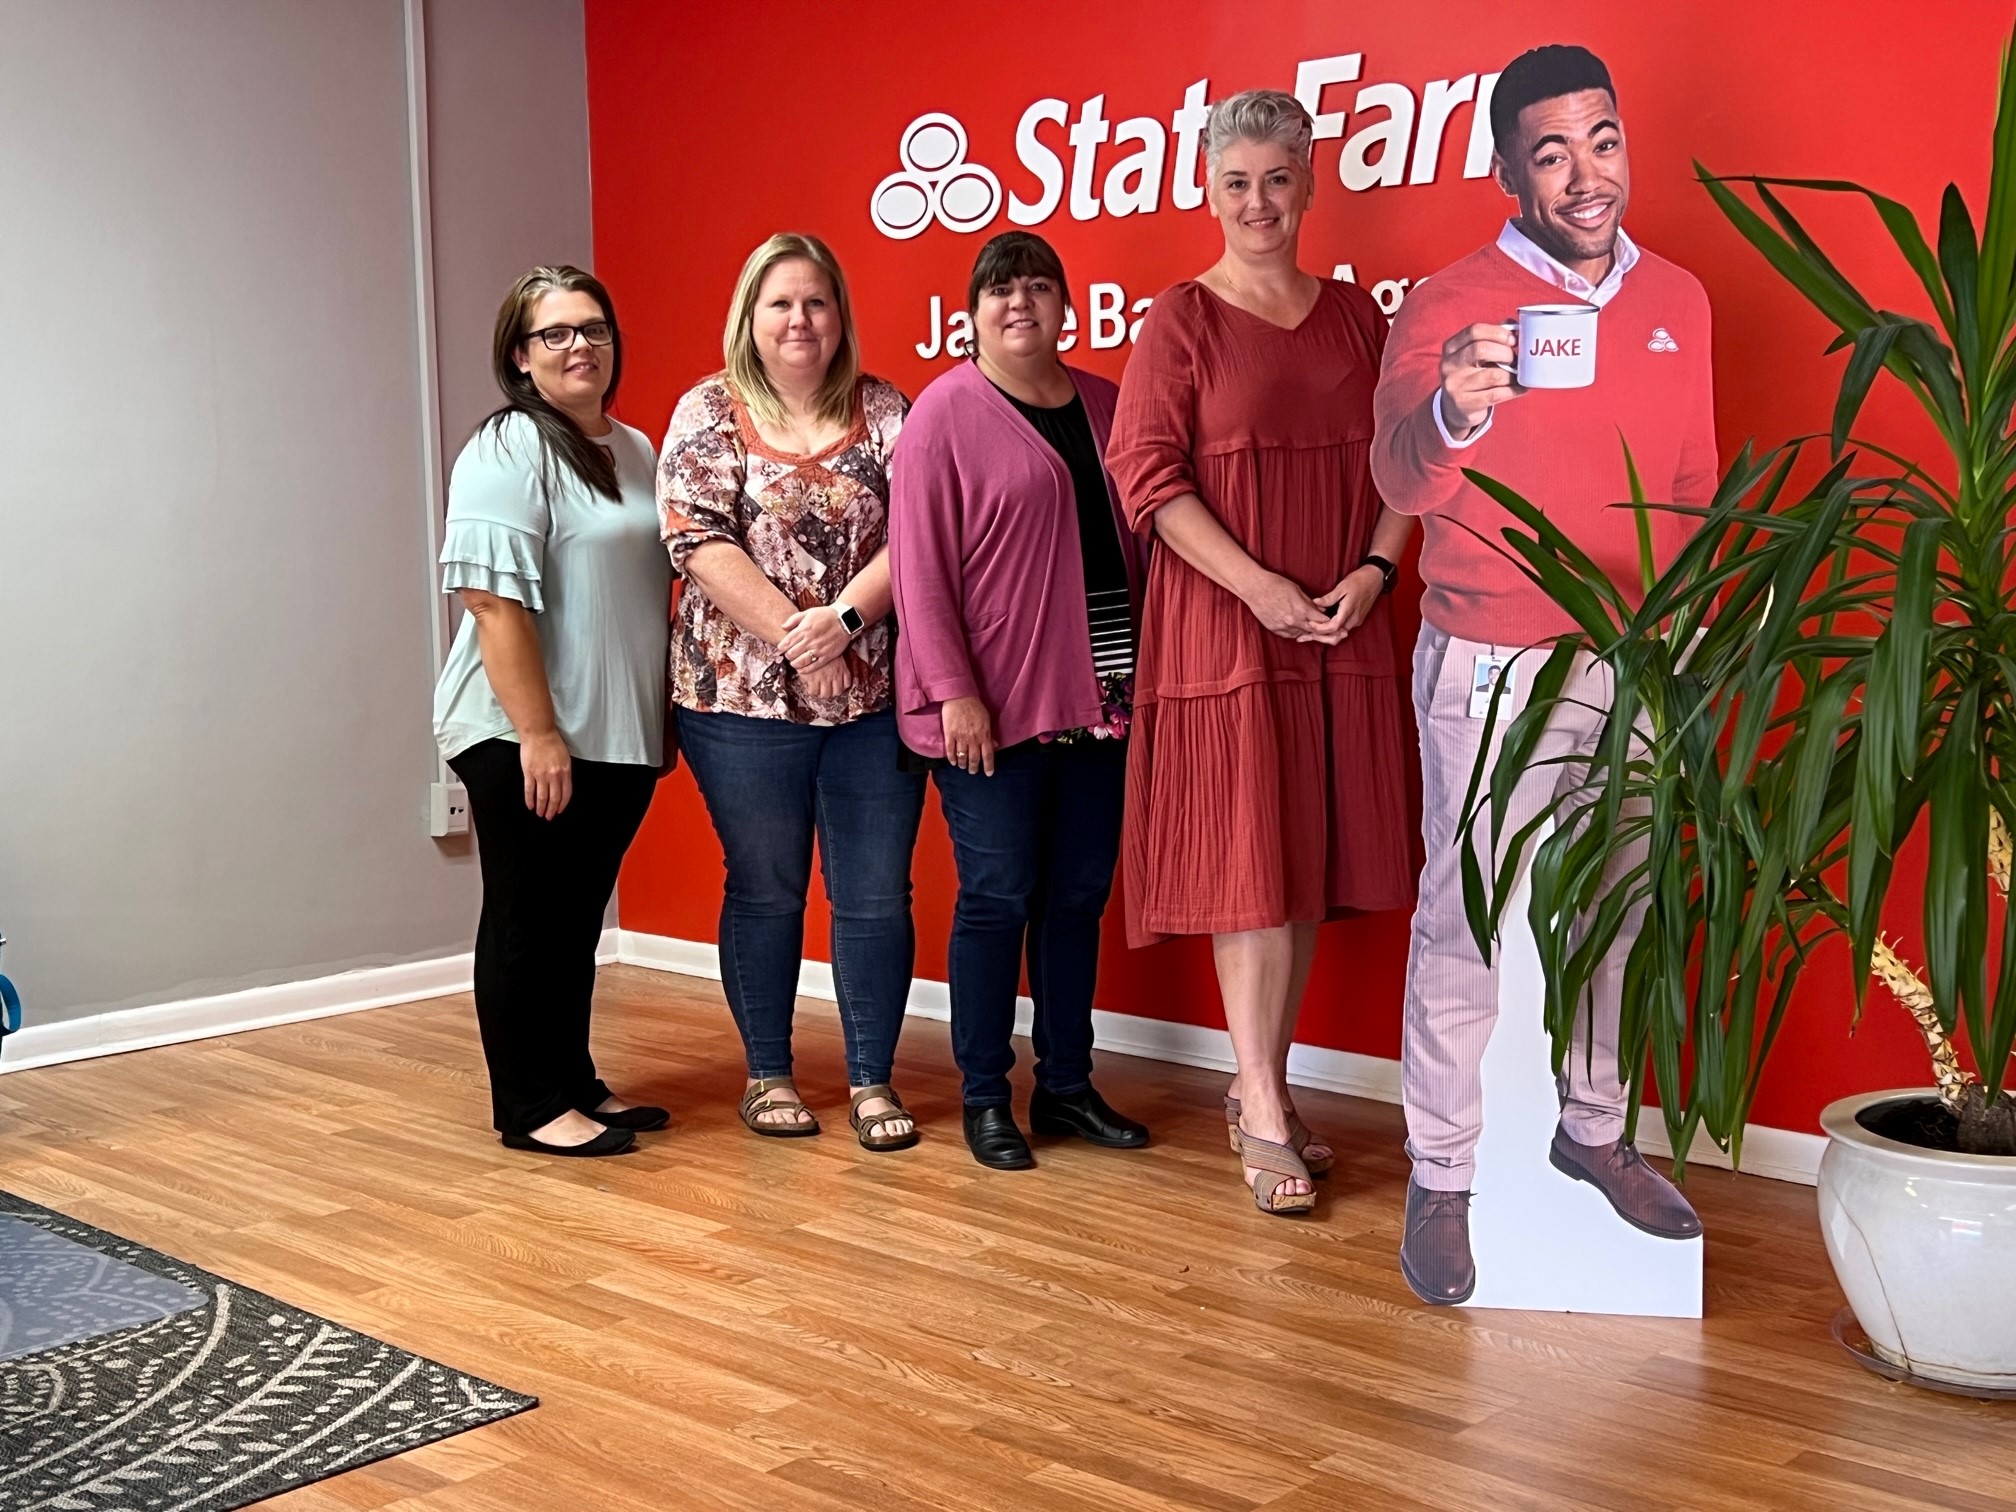 Jamie Barger State Farm Insurance team  with Jake! Come by our Abingdon office for a quote Jamie Barger - State Farm Insurance Agent Abingdon (276)676-1150